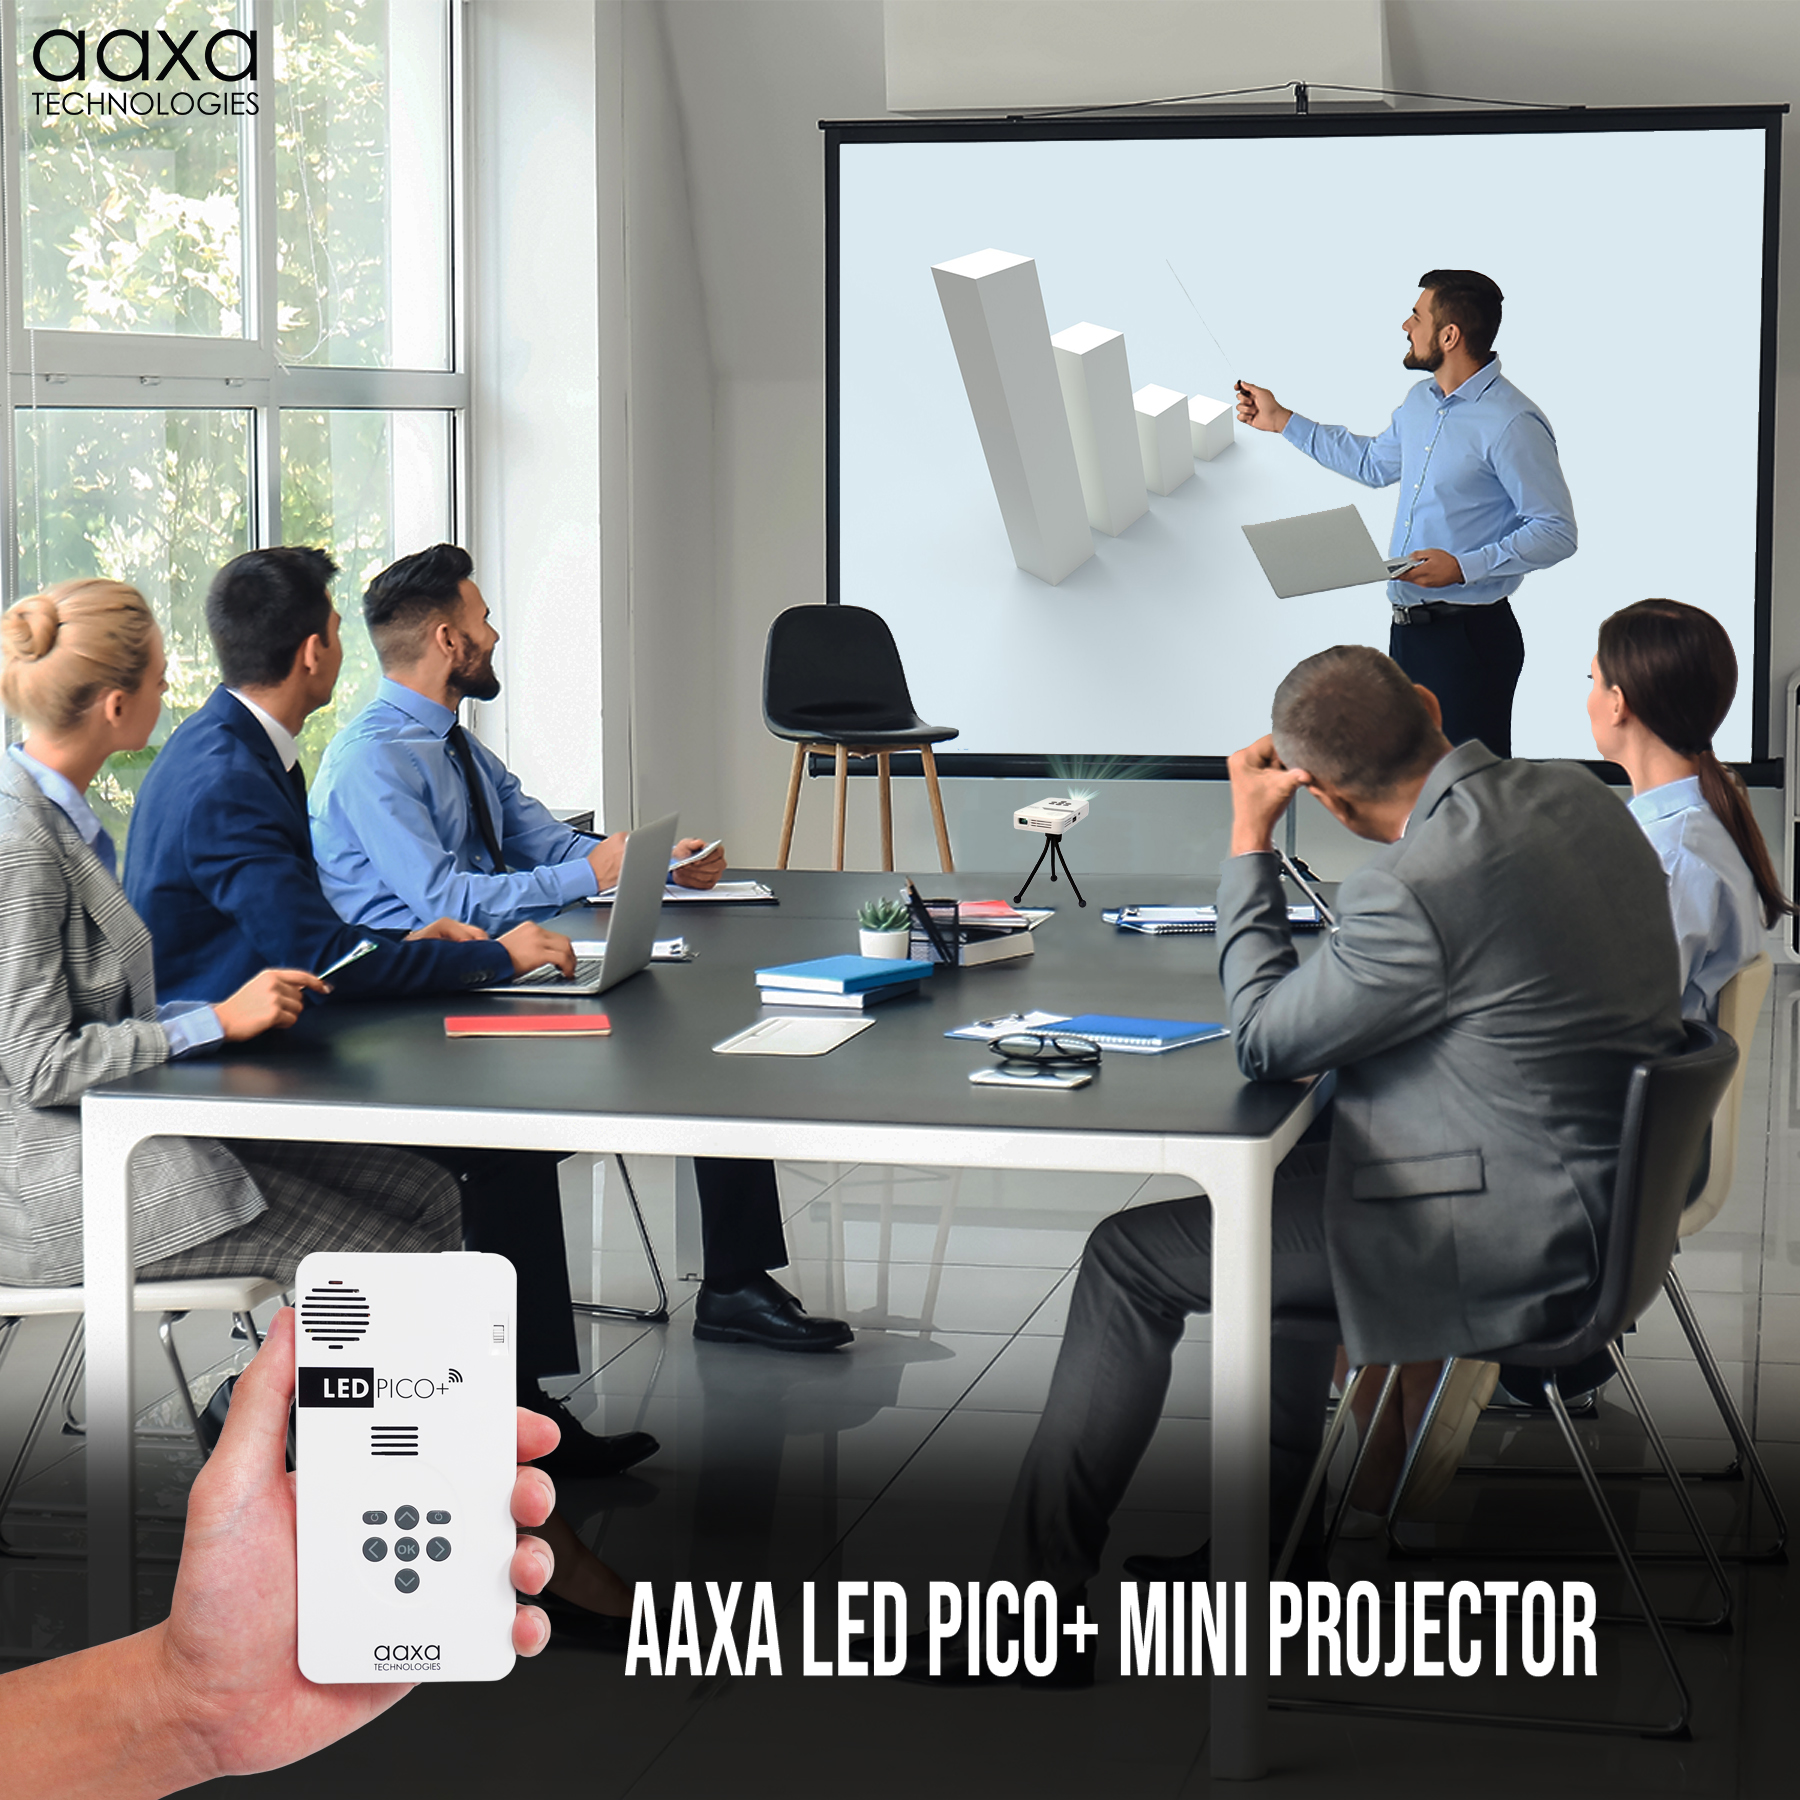 LED Pico+ is Good for Small Business Presentations